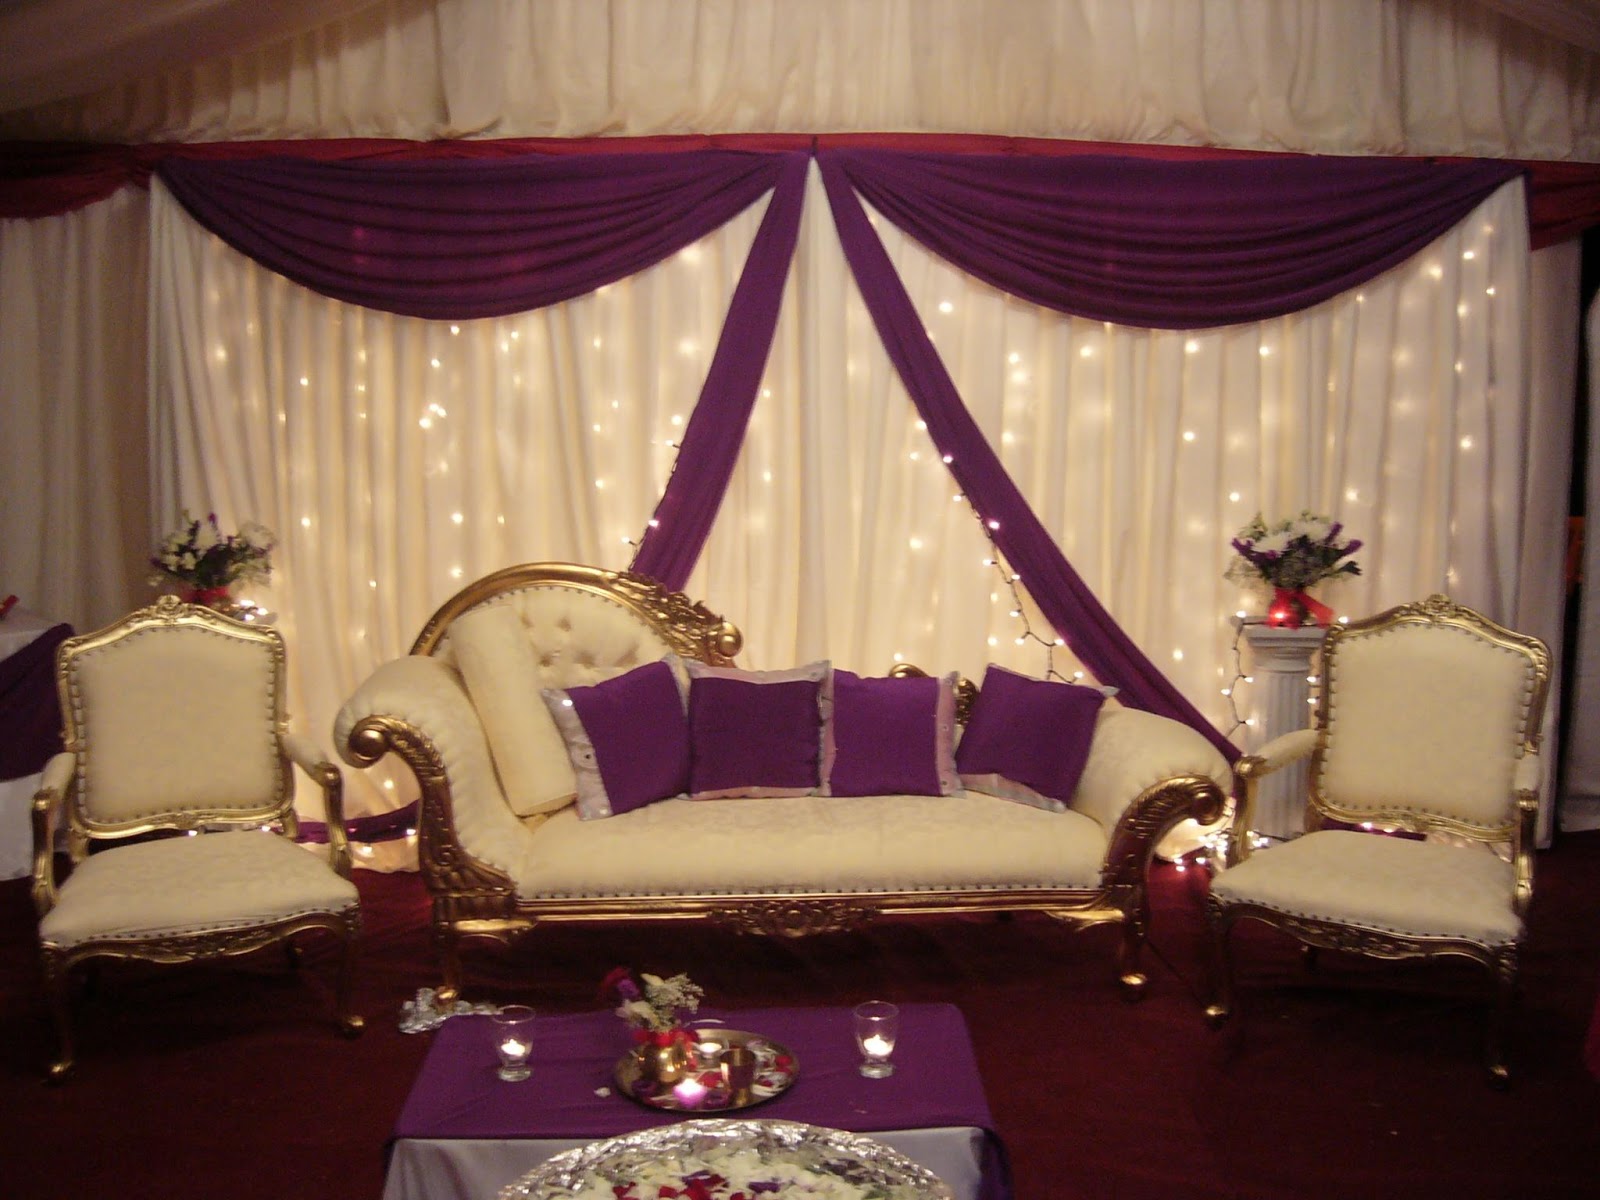 about marriage marriage decoration photos 2013 marriage 